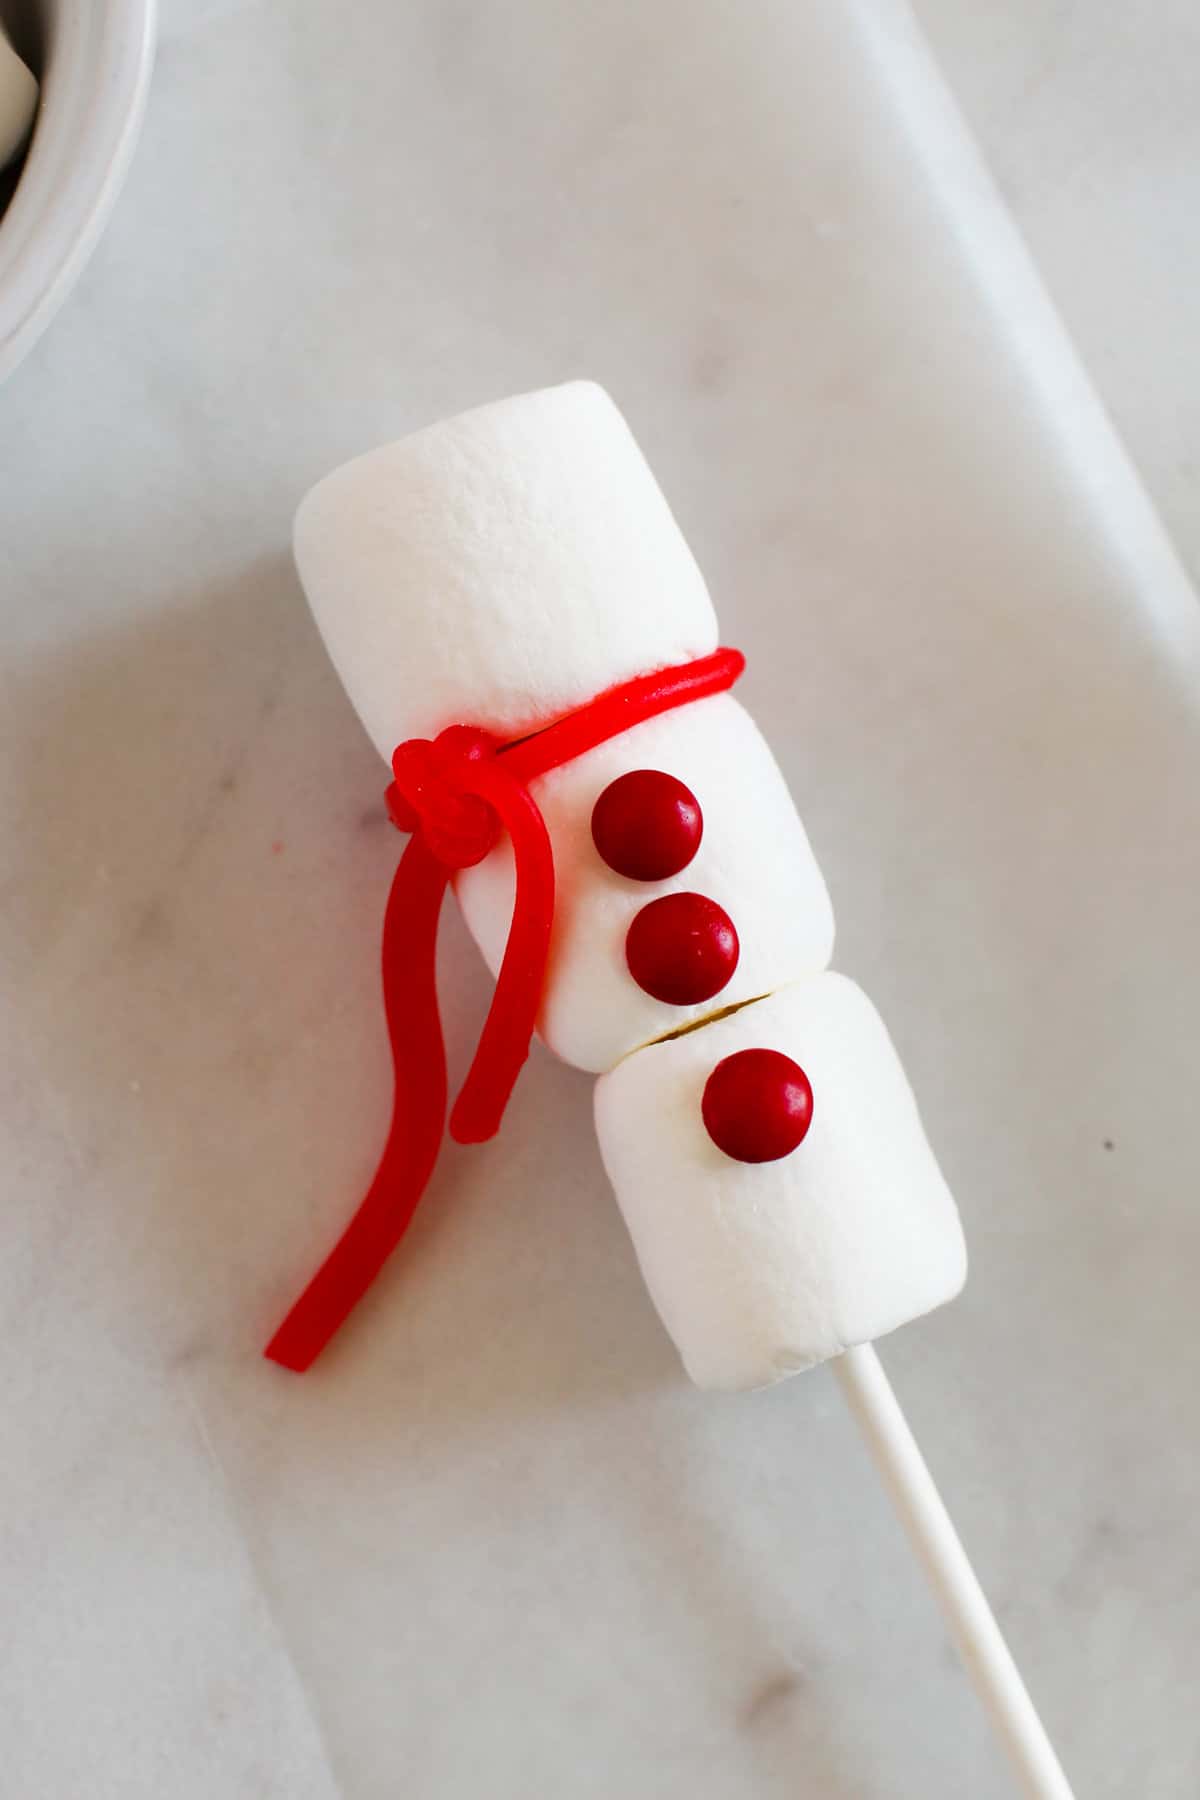 A piece of red candy has been tied between the top and middle marshmallow to make a scarf.